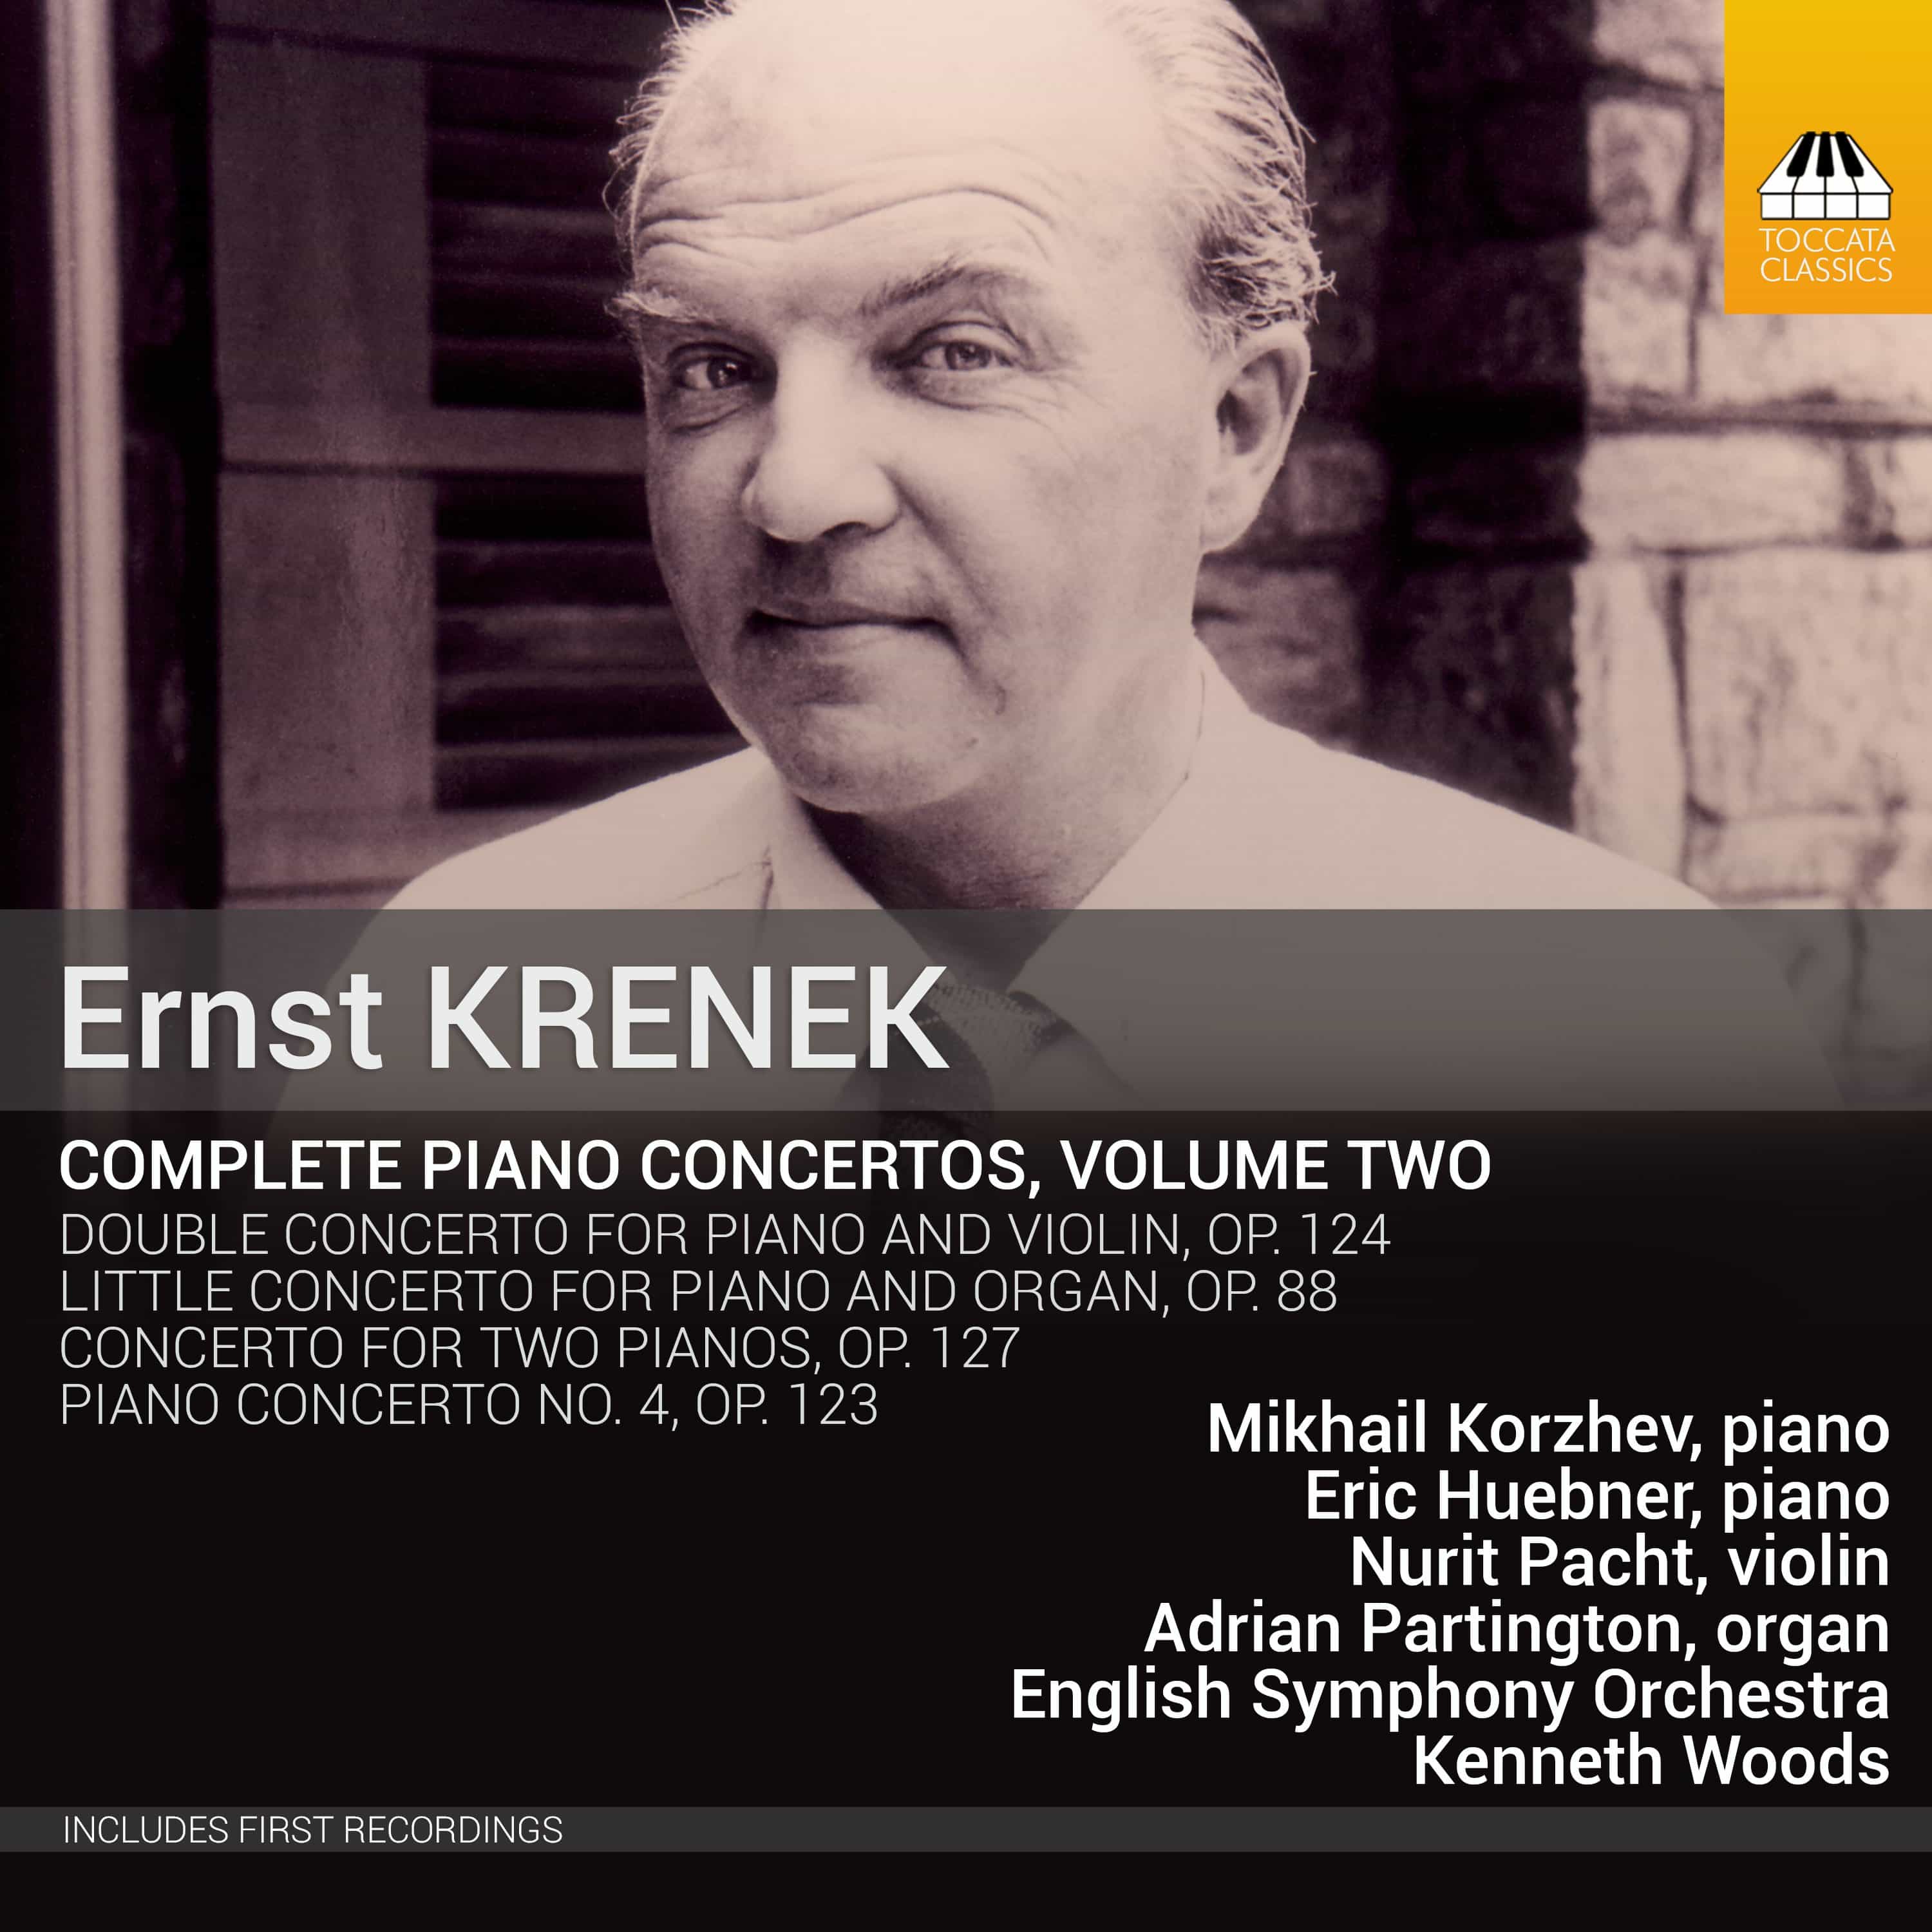 CD Review: BBC Music Magazine on Krenek Complete Piano Concertos, vol. 2